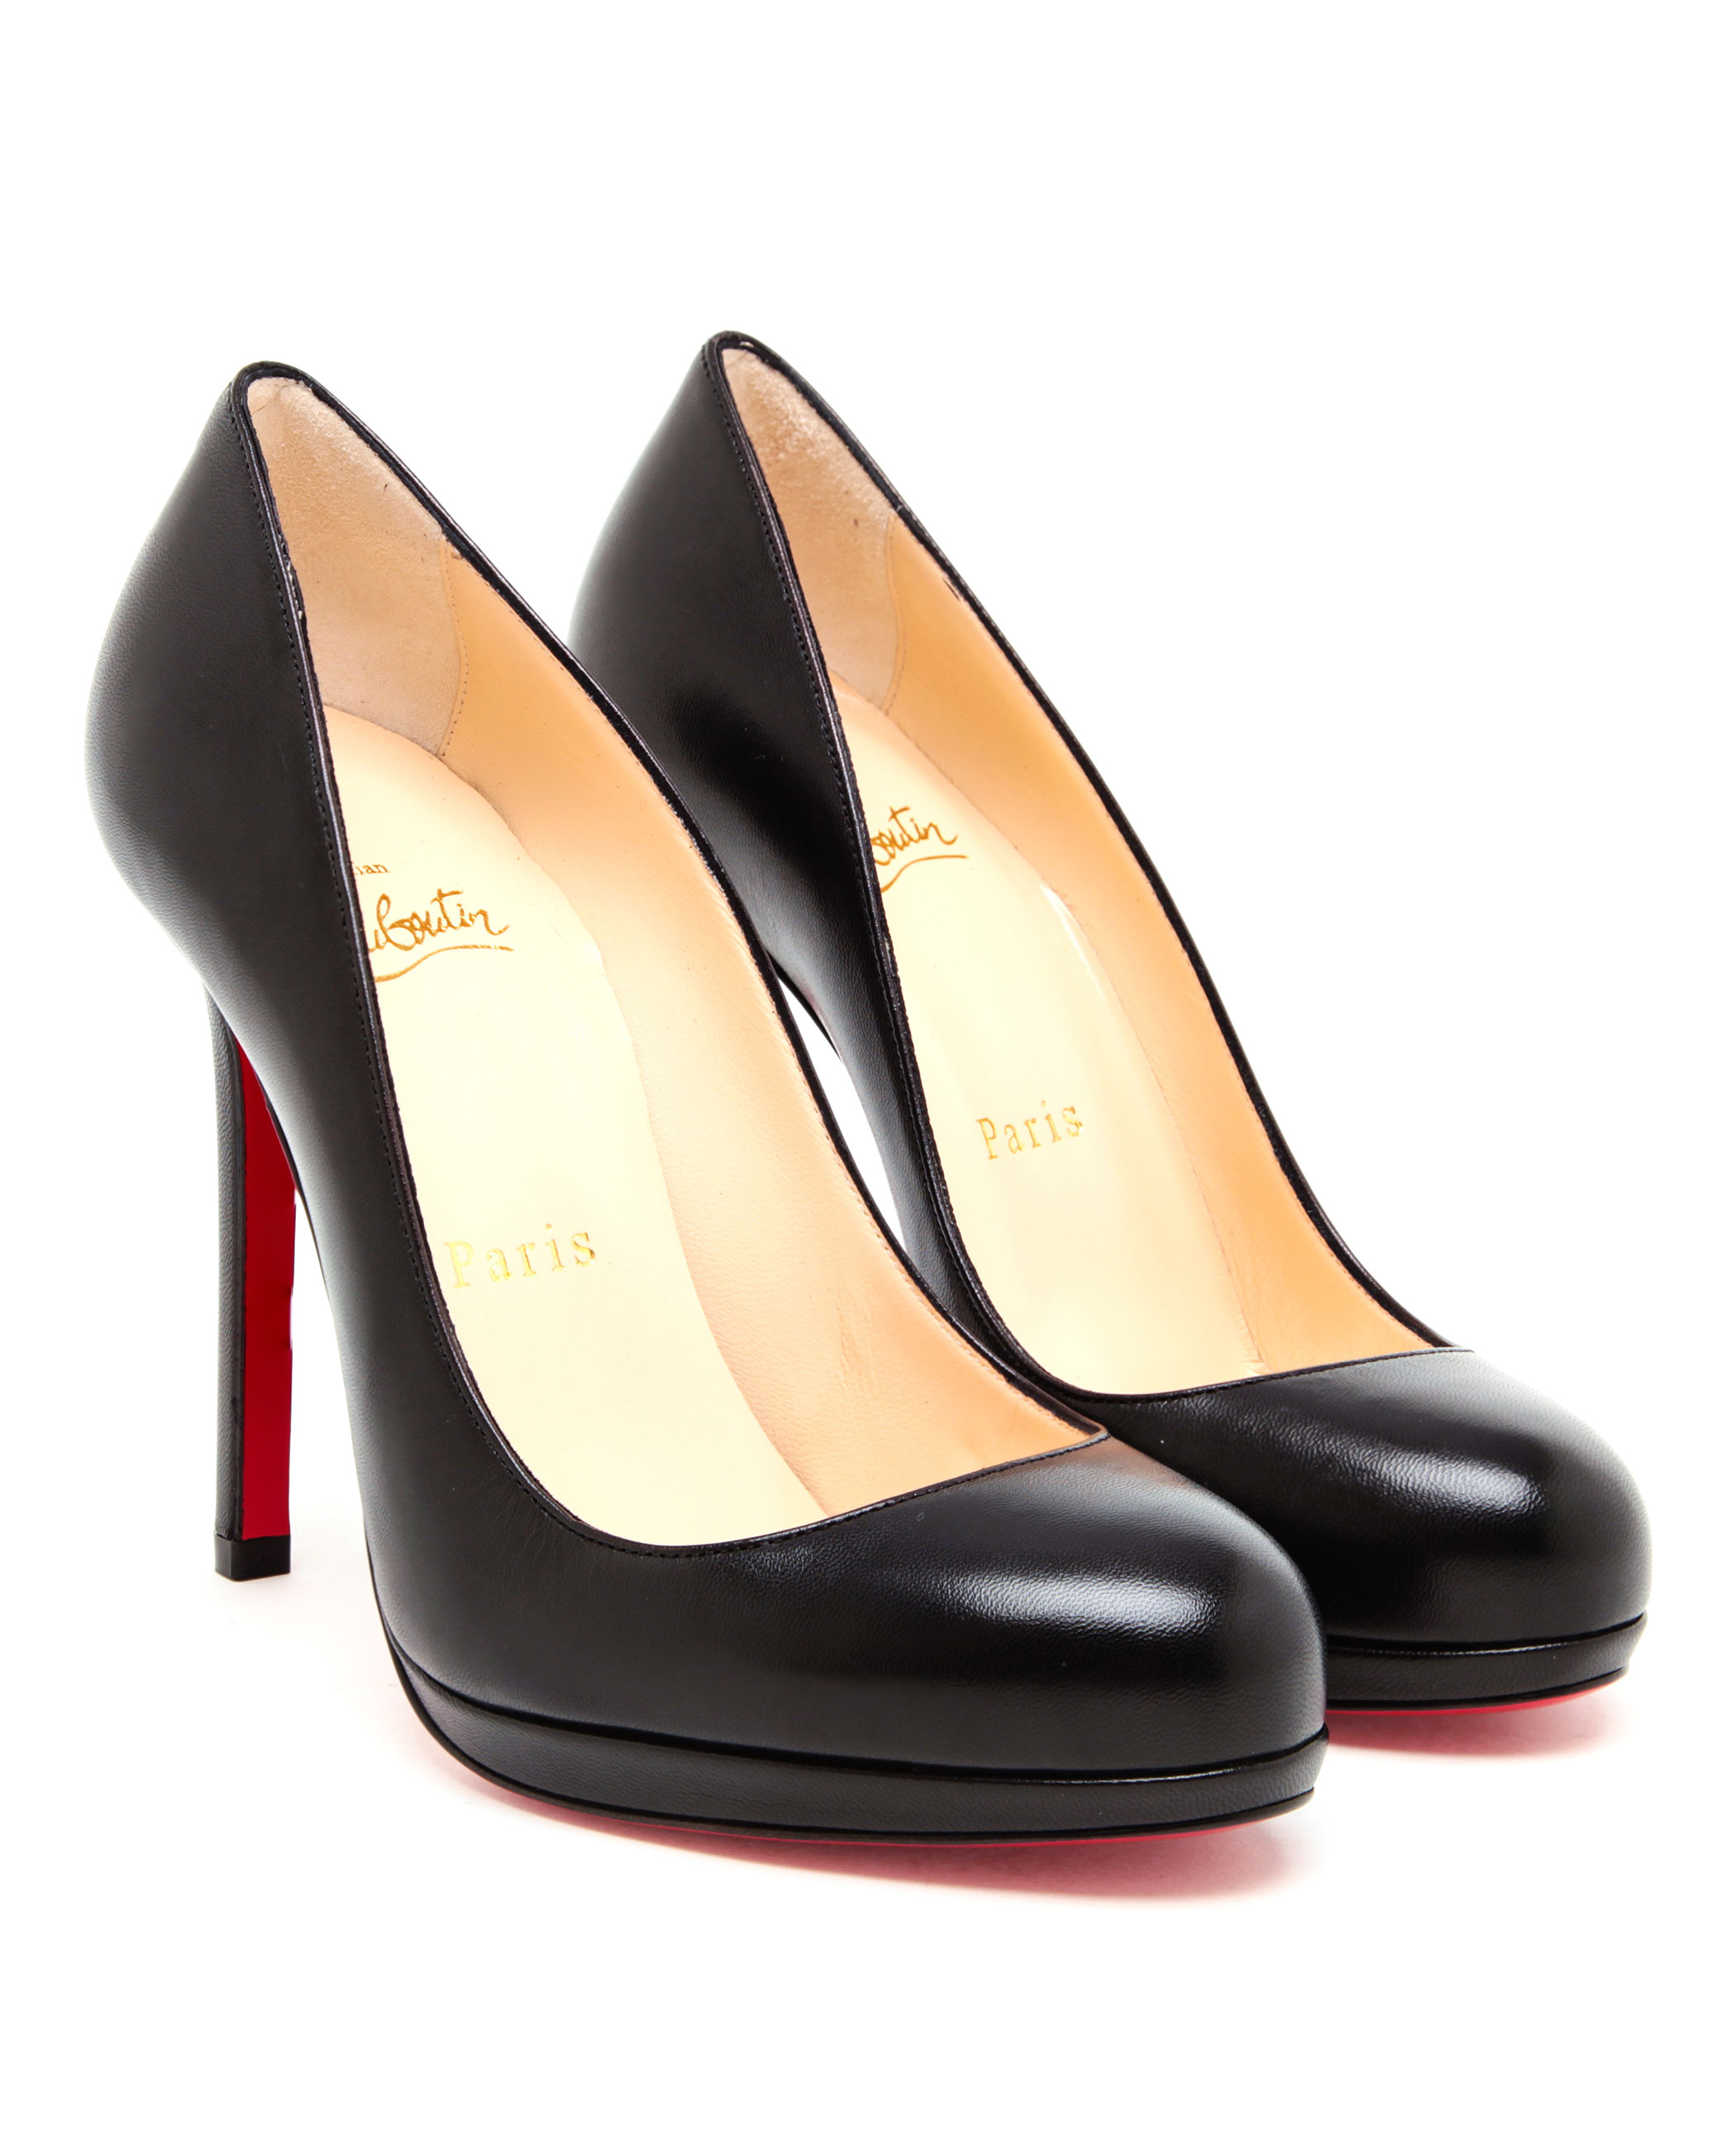 Christian louboutin Neofilo Leather Pumps in Black | Lyst  